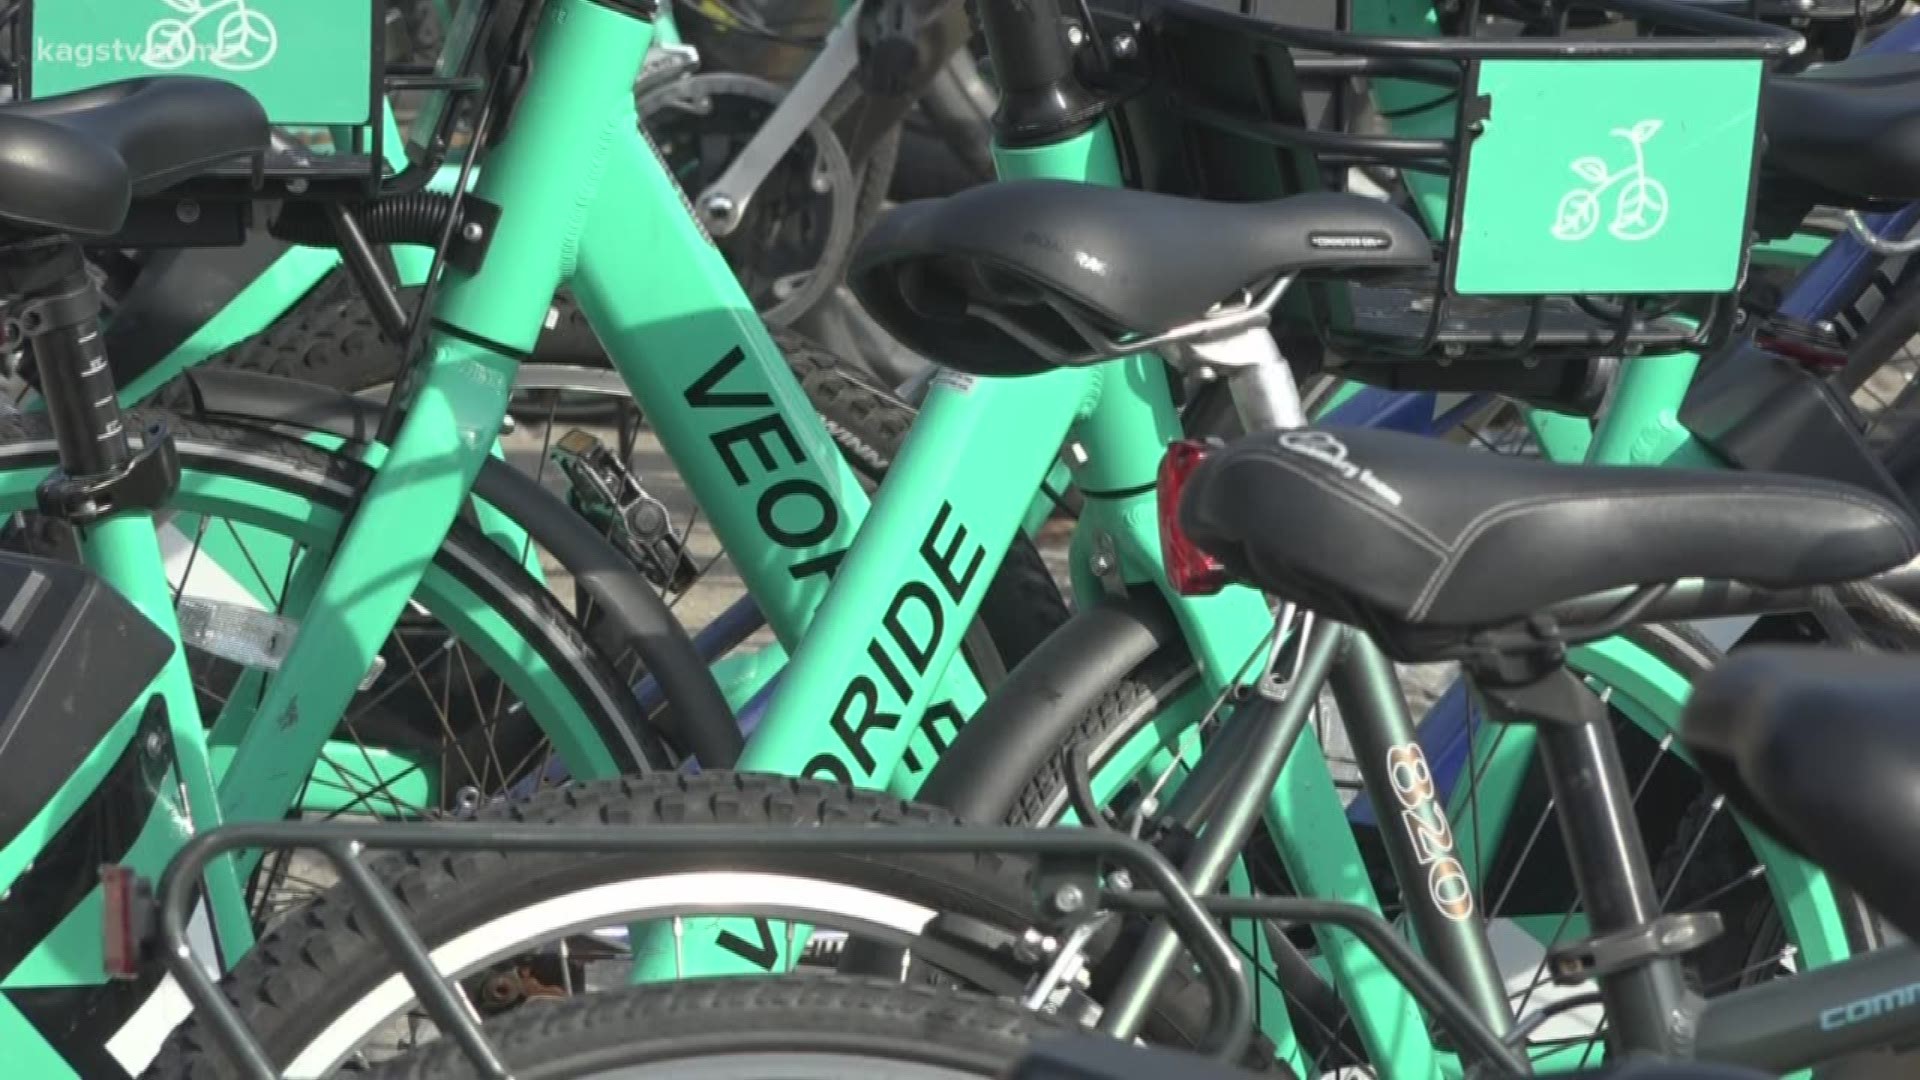 The bike share company's contract may not be renewed at the end of the year.